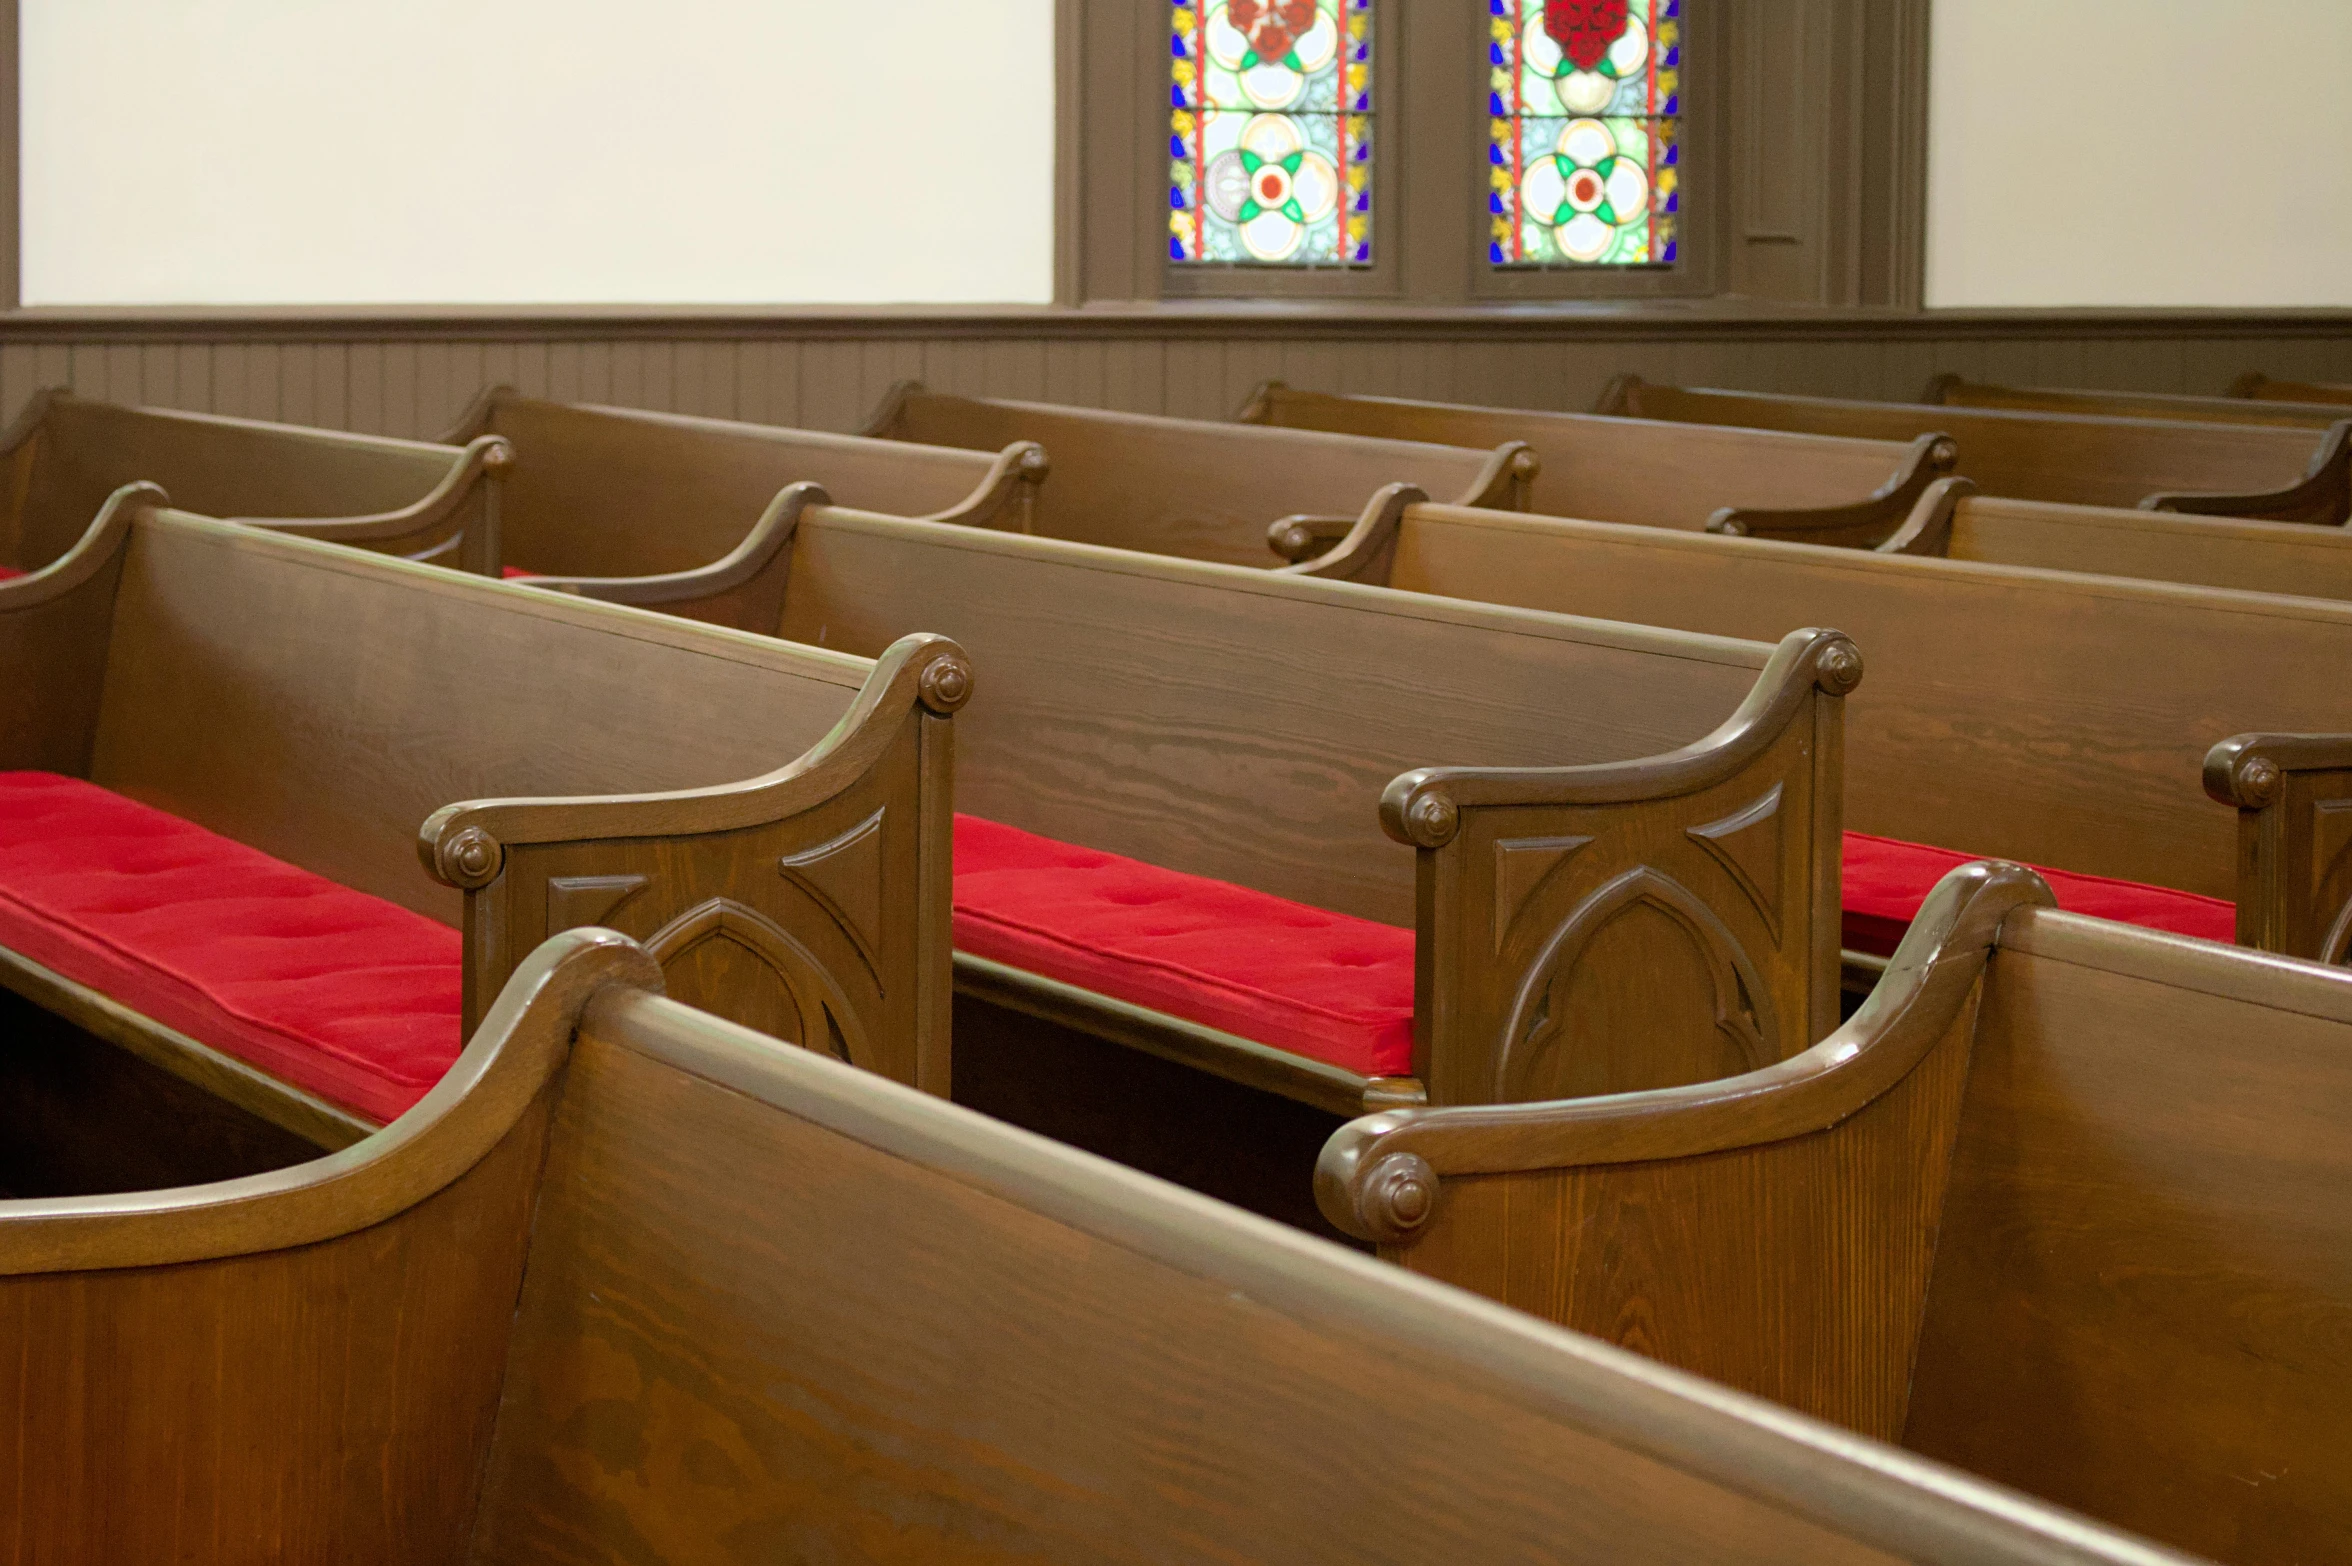 wood pews with red seat covers in an old church